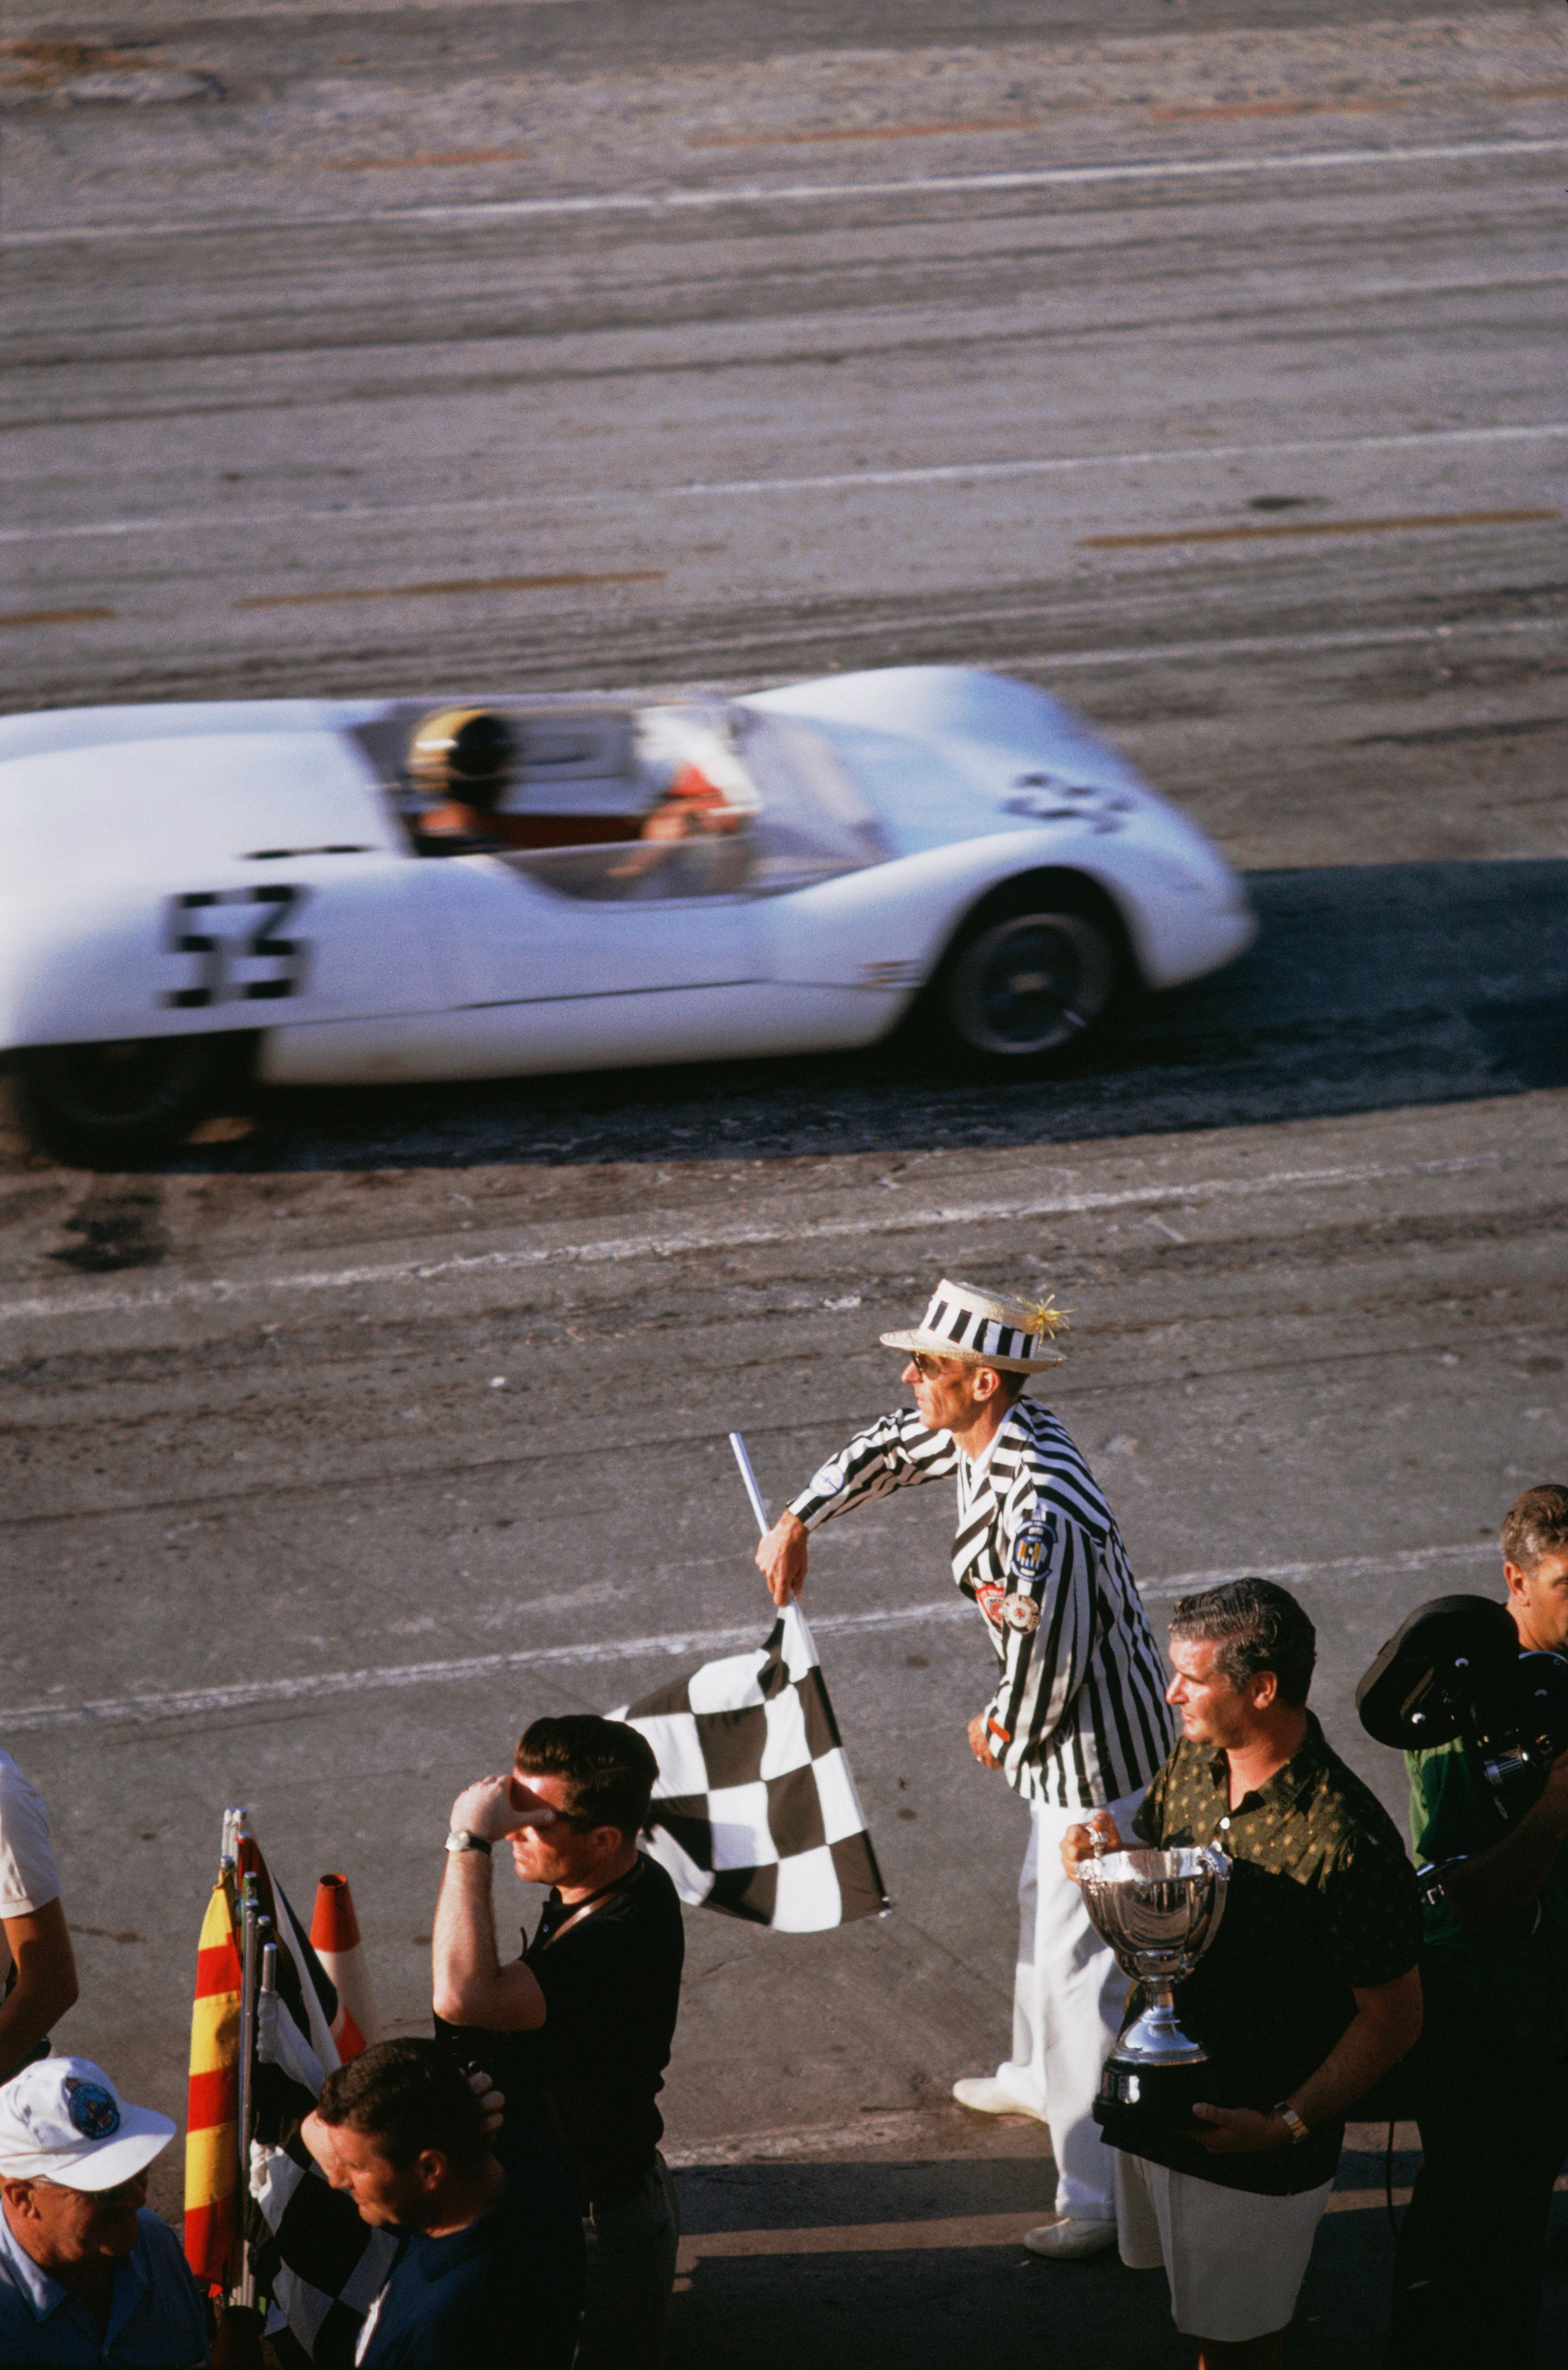 The Bahamas Speed Week in Nassau, 1963.
Chromogenic Lambda print
Printed Later
Estate stamped and hand numbered edition of 150 with certificate of authenticity from the estate.

The Bahamas Speed Week in Nassau, 1963.

Slim Aarons (1916-2006) worked